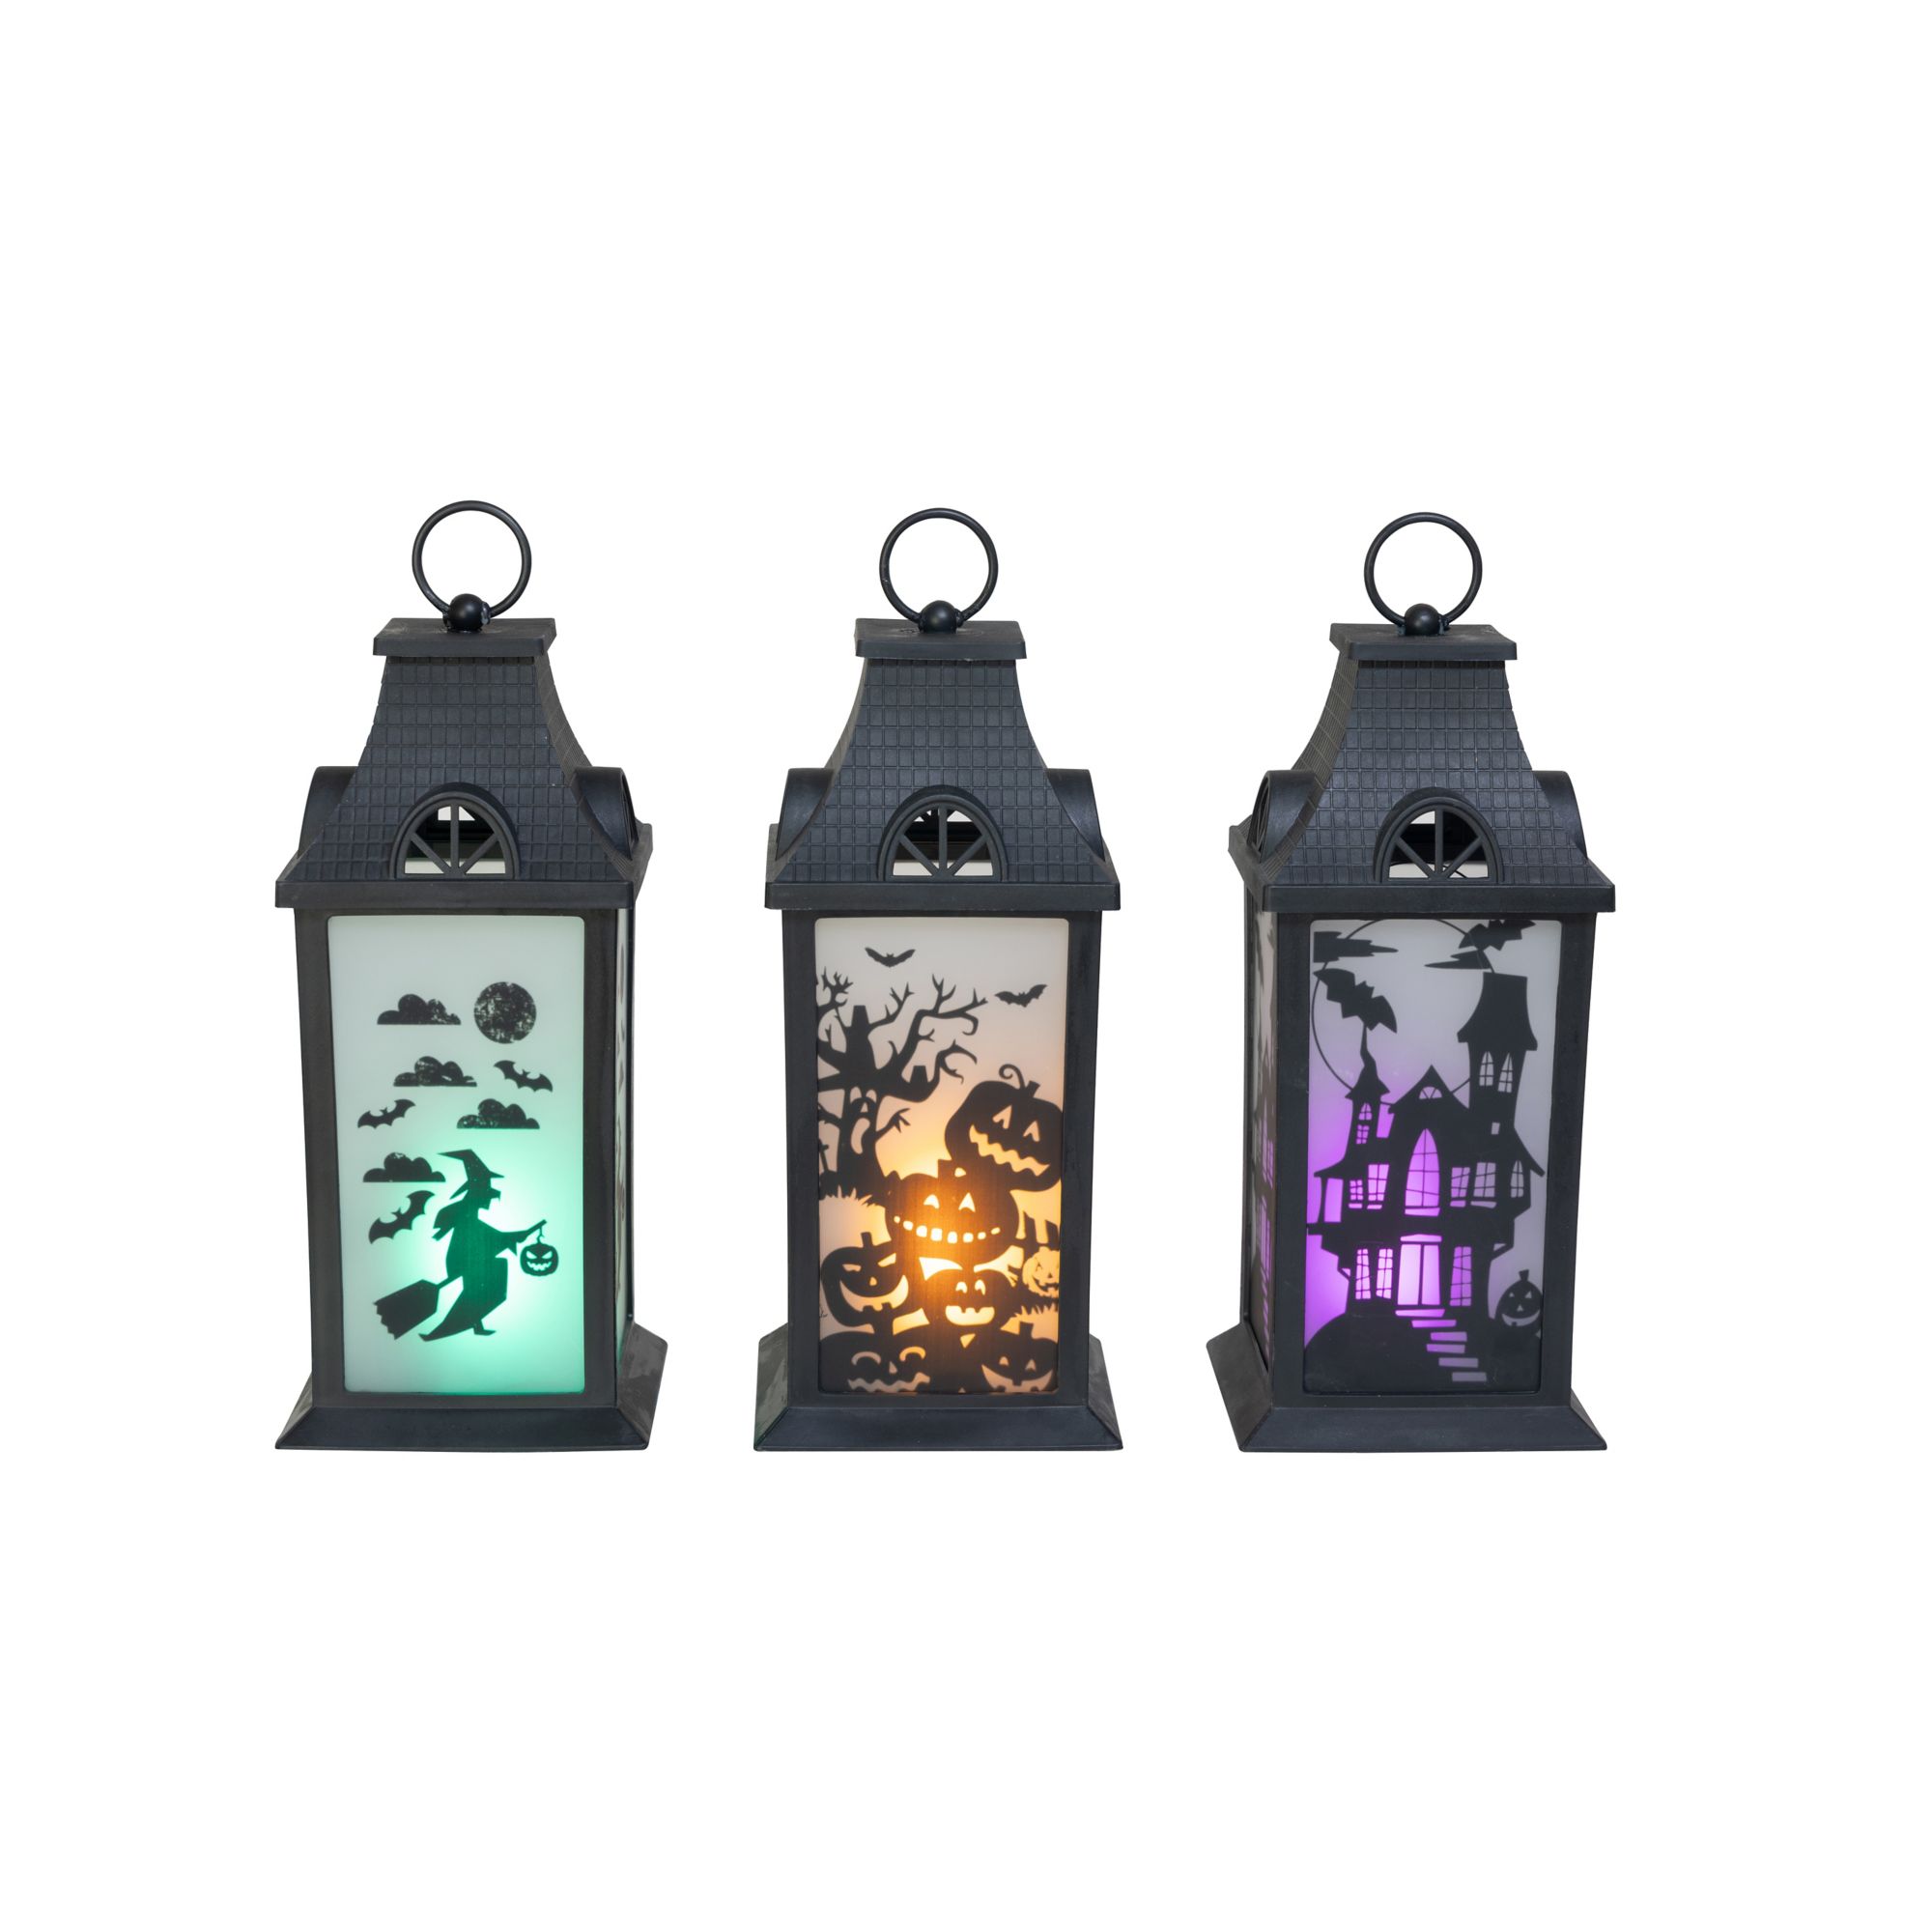 Battery-Operated Metal Lantern with LED Candle - 14 Black Window